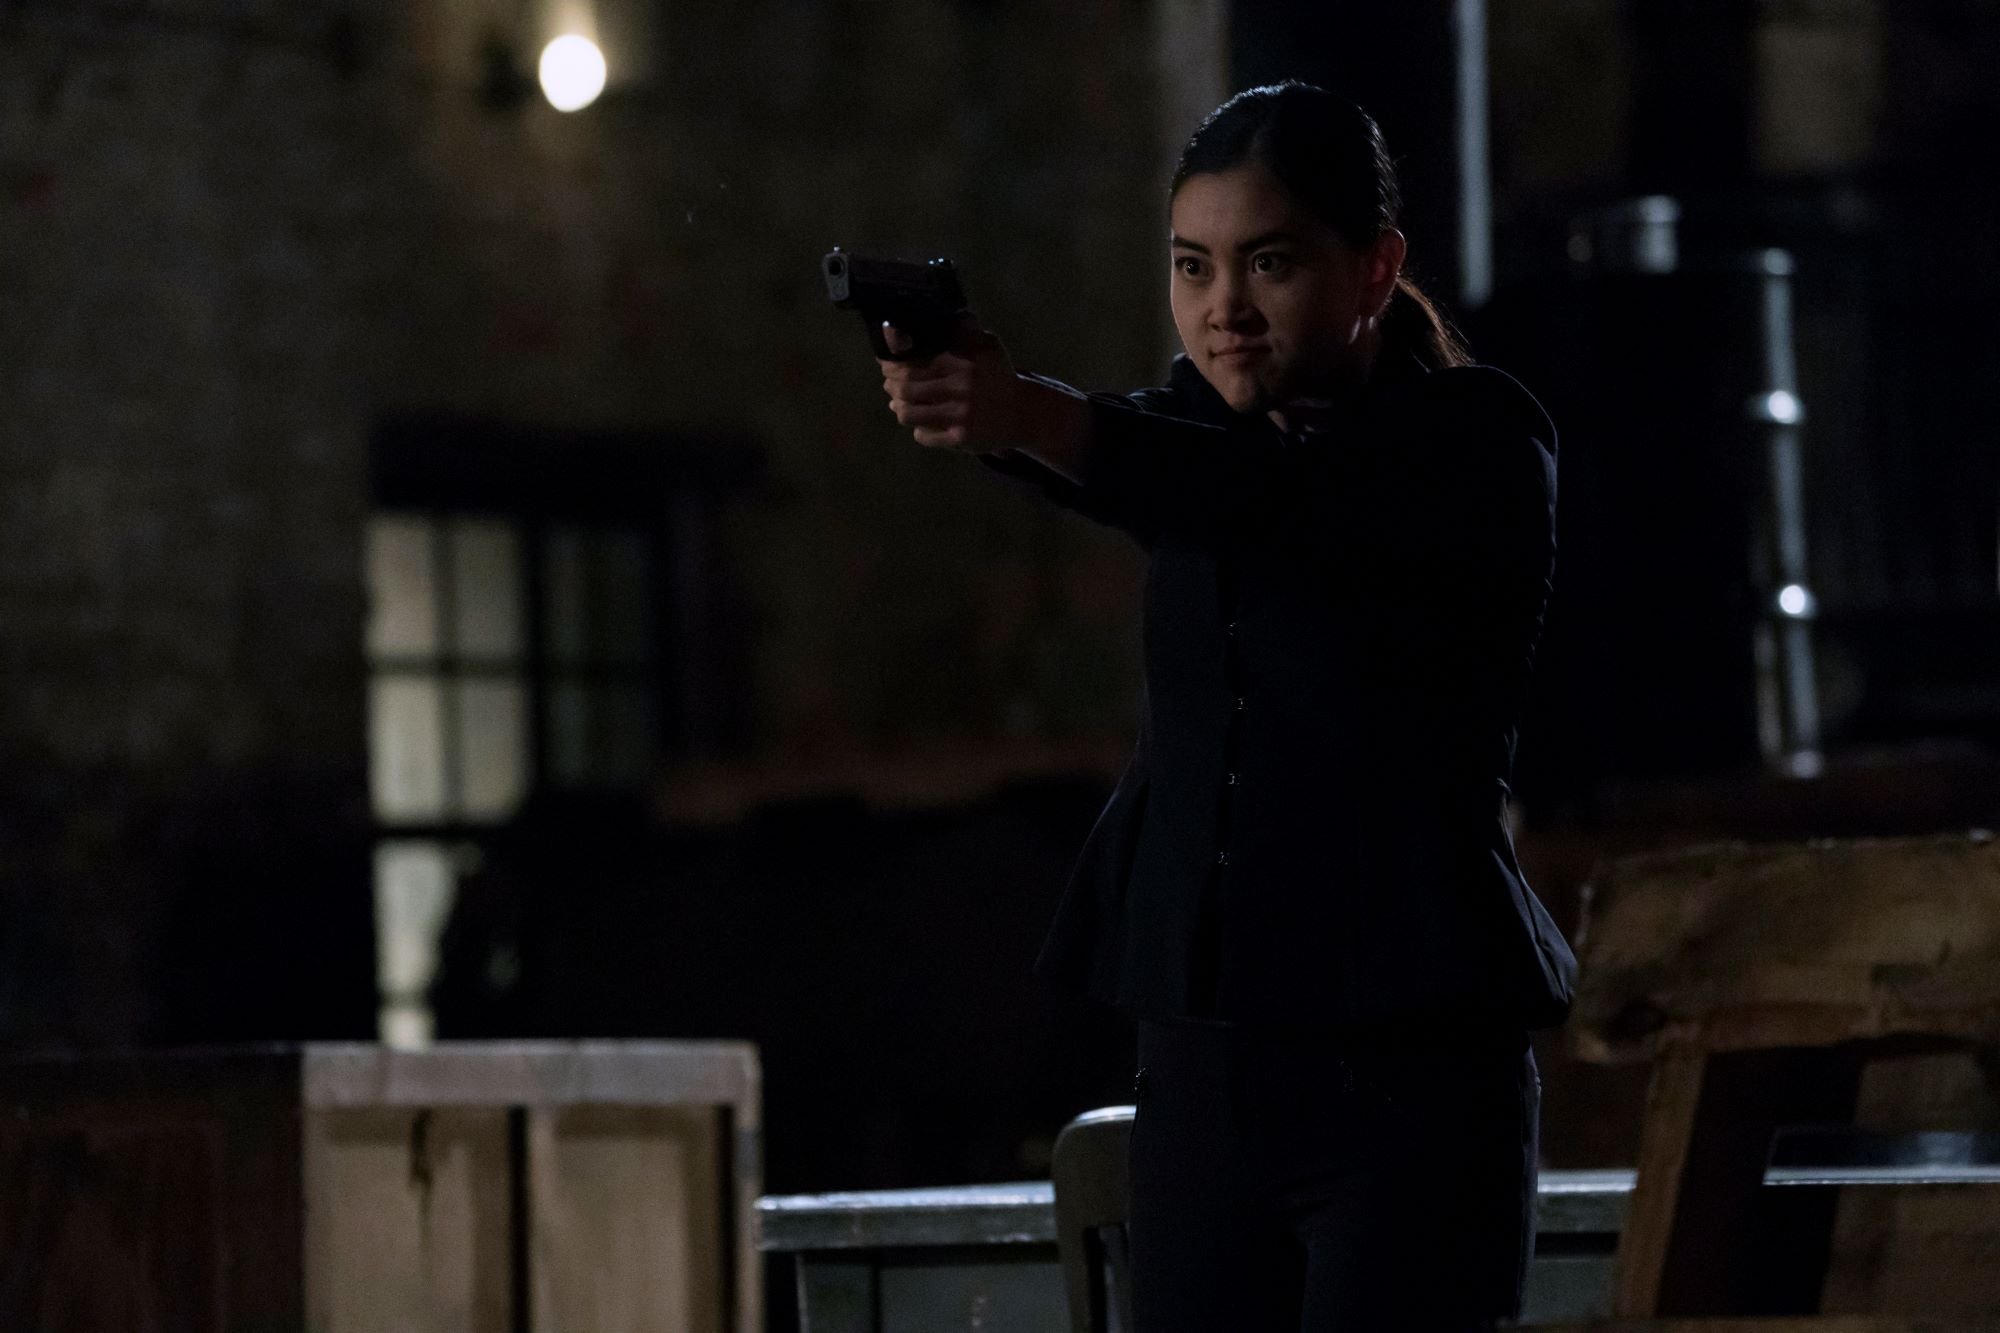 'The Blacklist' star Laura Sohn, in character as Alina Park, wears a dark jacket and pants and points her gun.